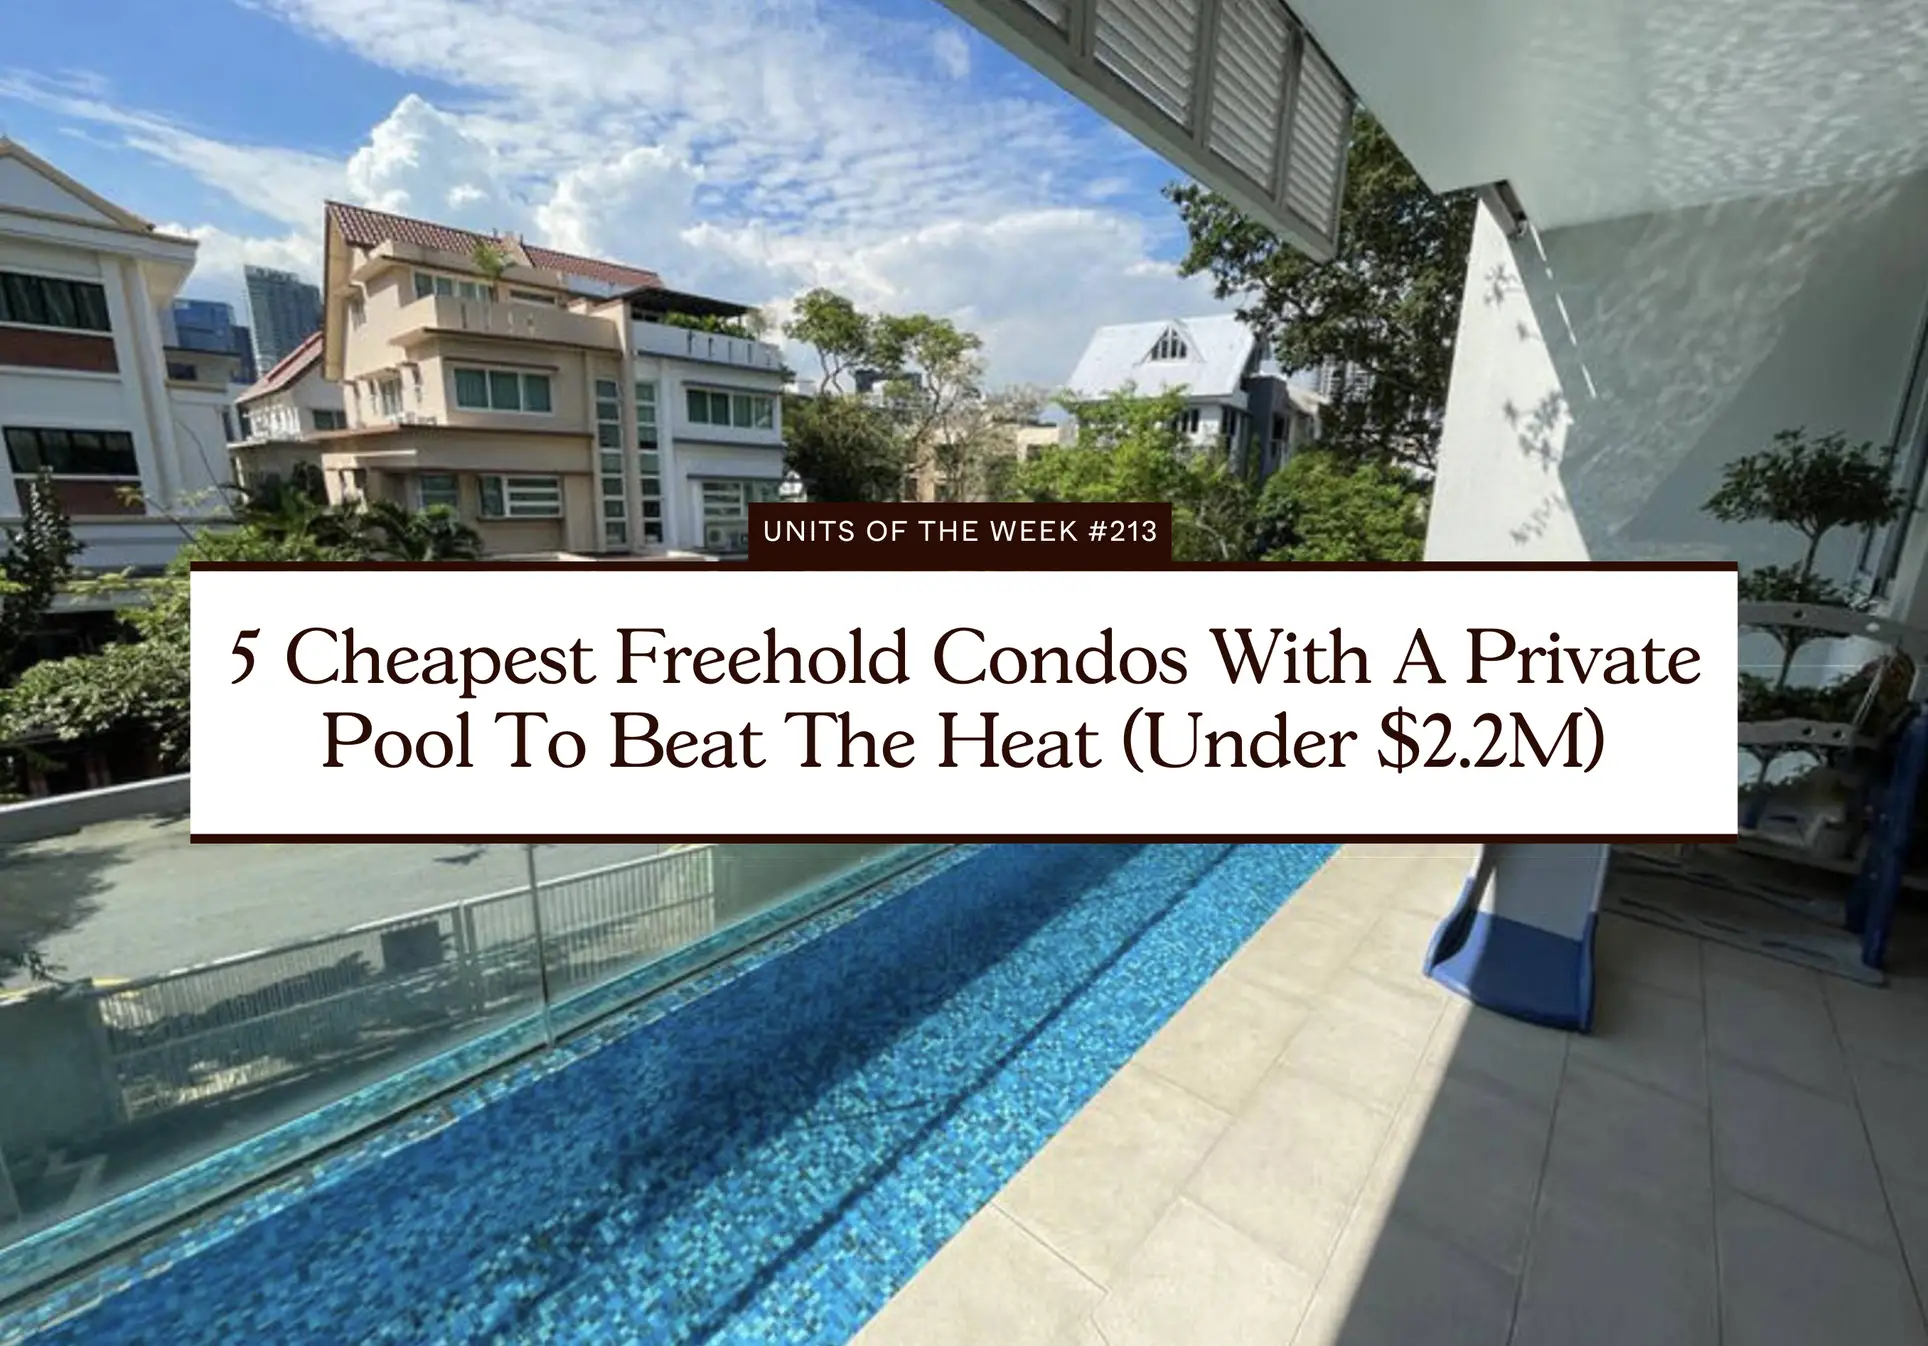 5 Cheapest Freehold Condos With A Private Pool To Beat The Heat Under 2.2M